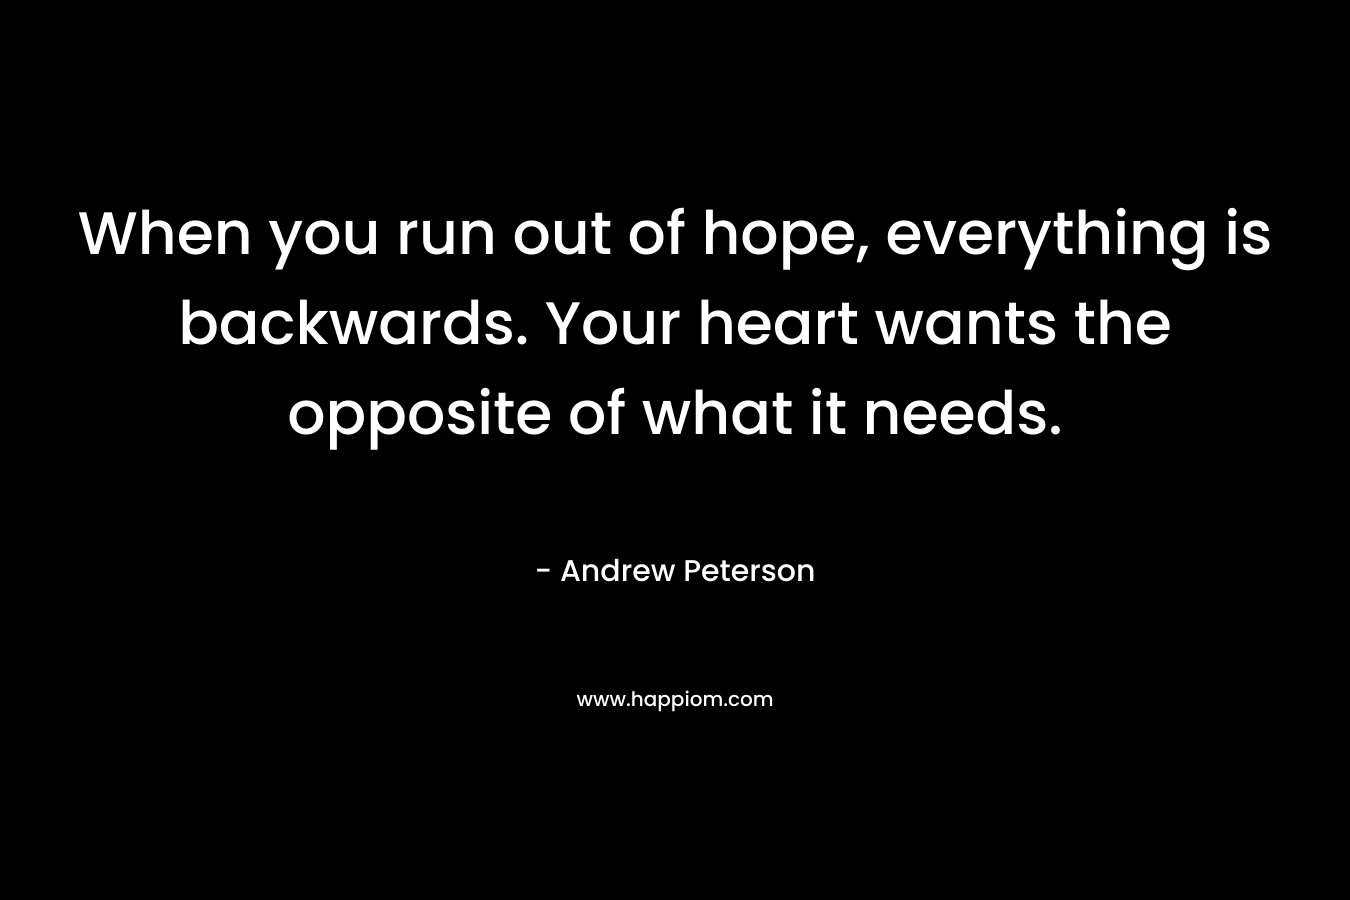 When you run out of hope, everything is backwards. Your heart wants the opposite of what it needs. – Andrew Peterson